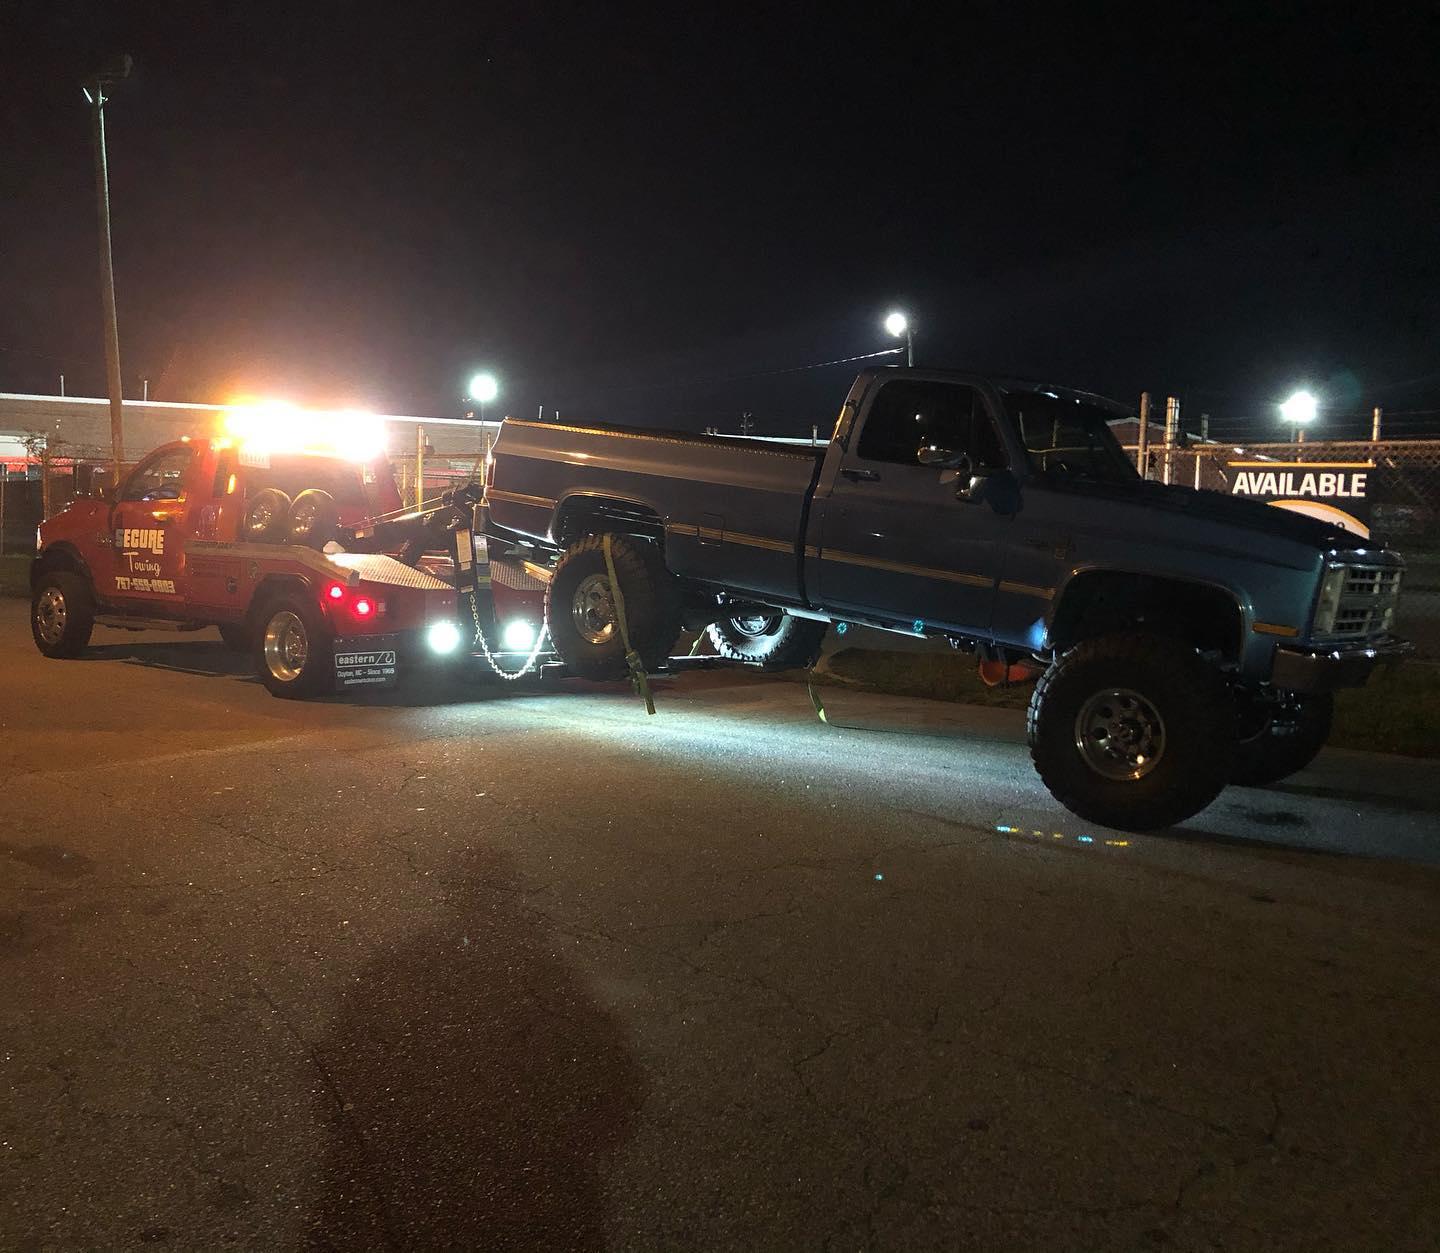 Call Secure Towing for all of your towing and roadside assistance needs. We are available 24/7 for your convenience. Call us at (757) 559-8803